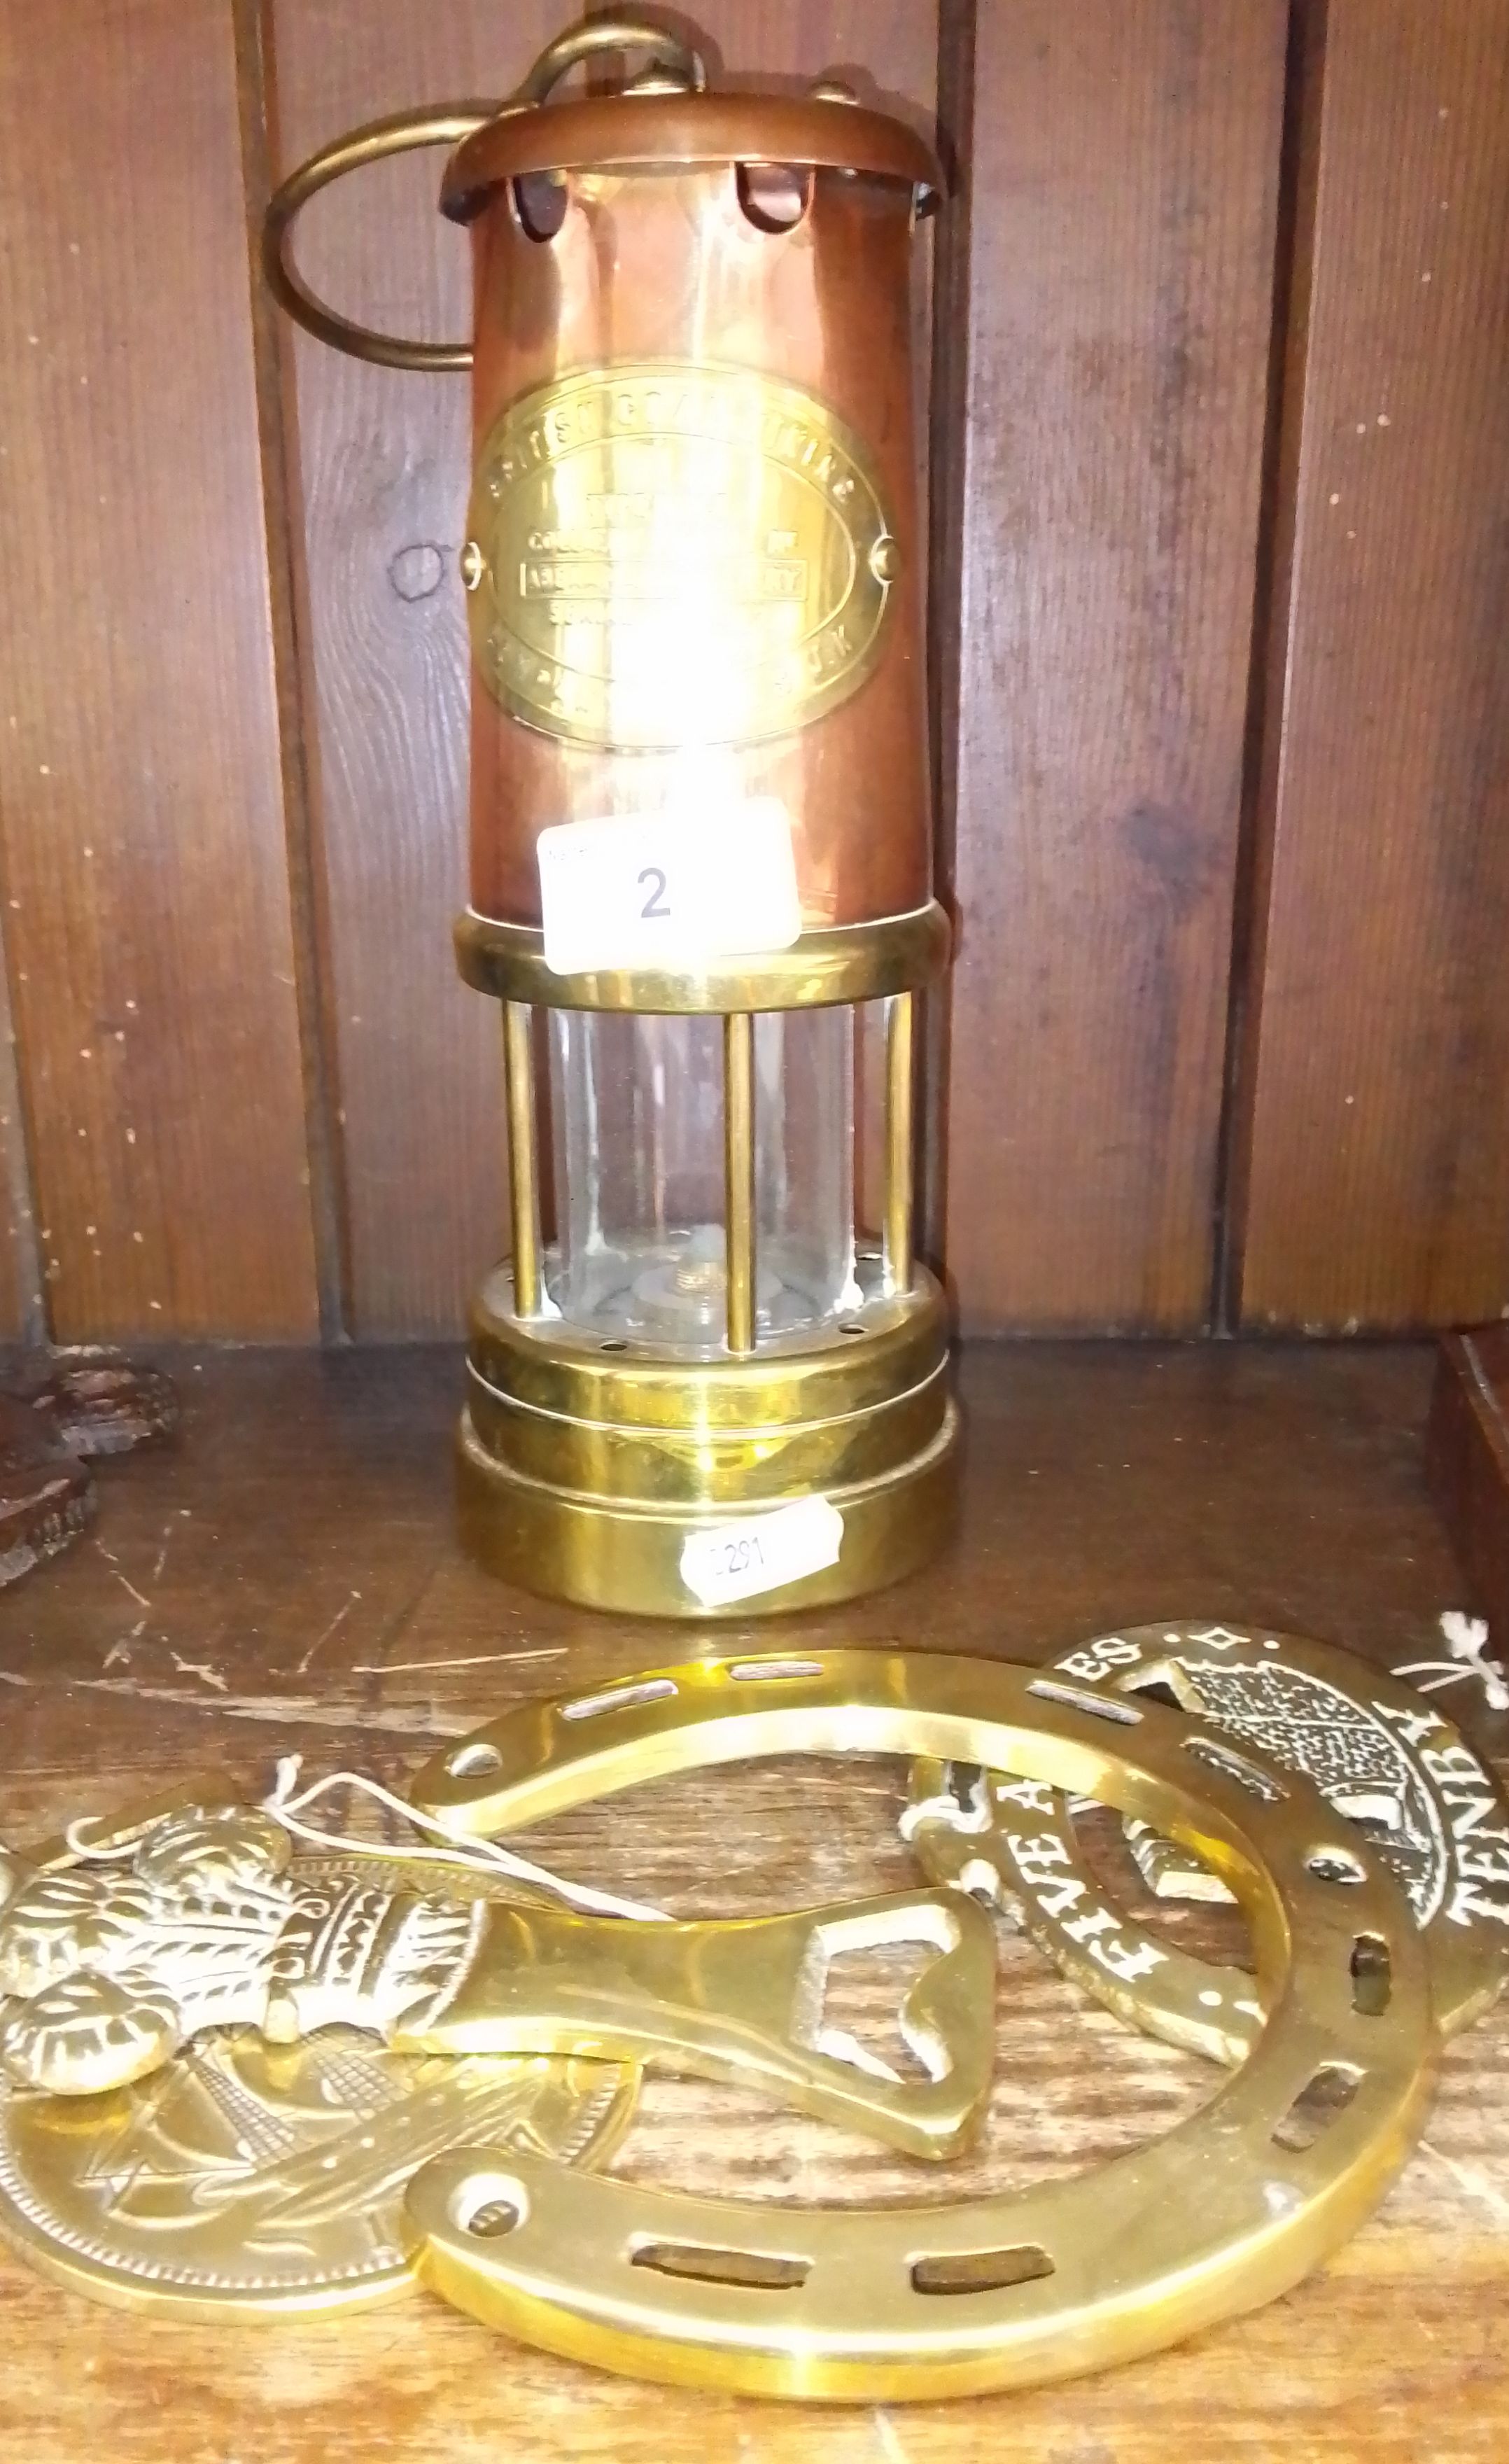 A repro miners lamp together with horse brasses